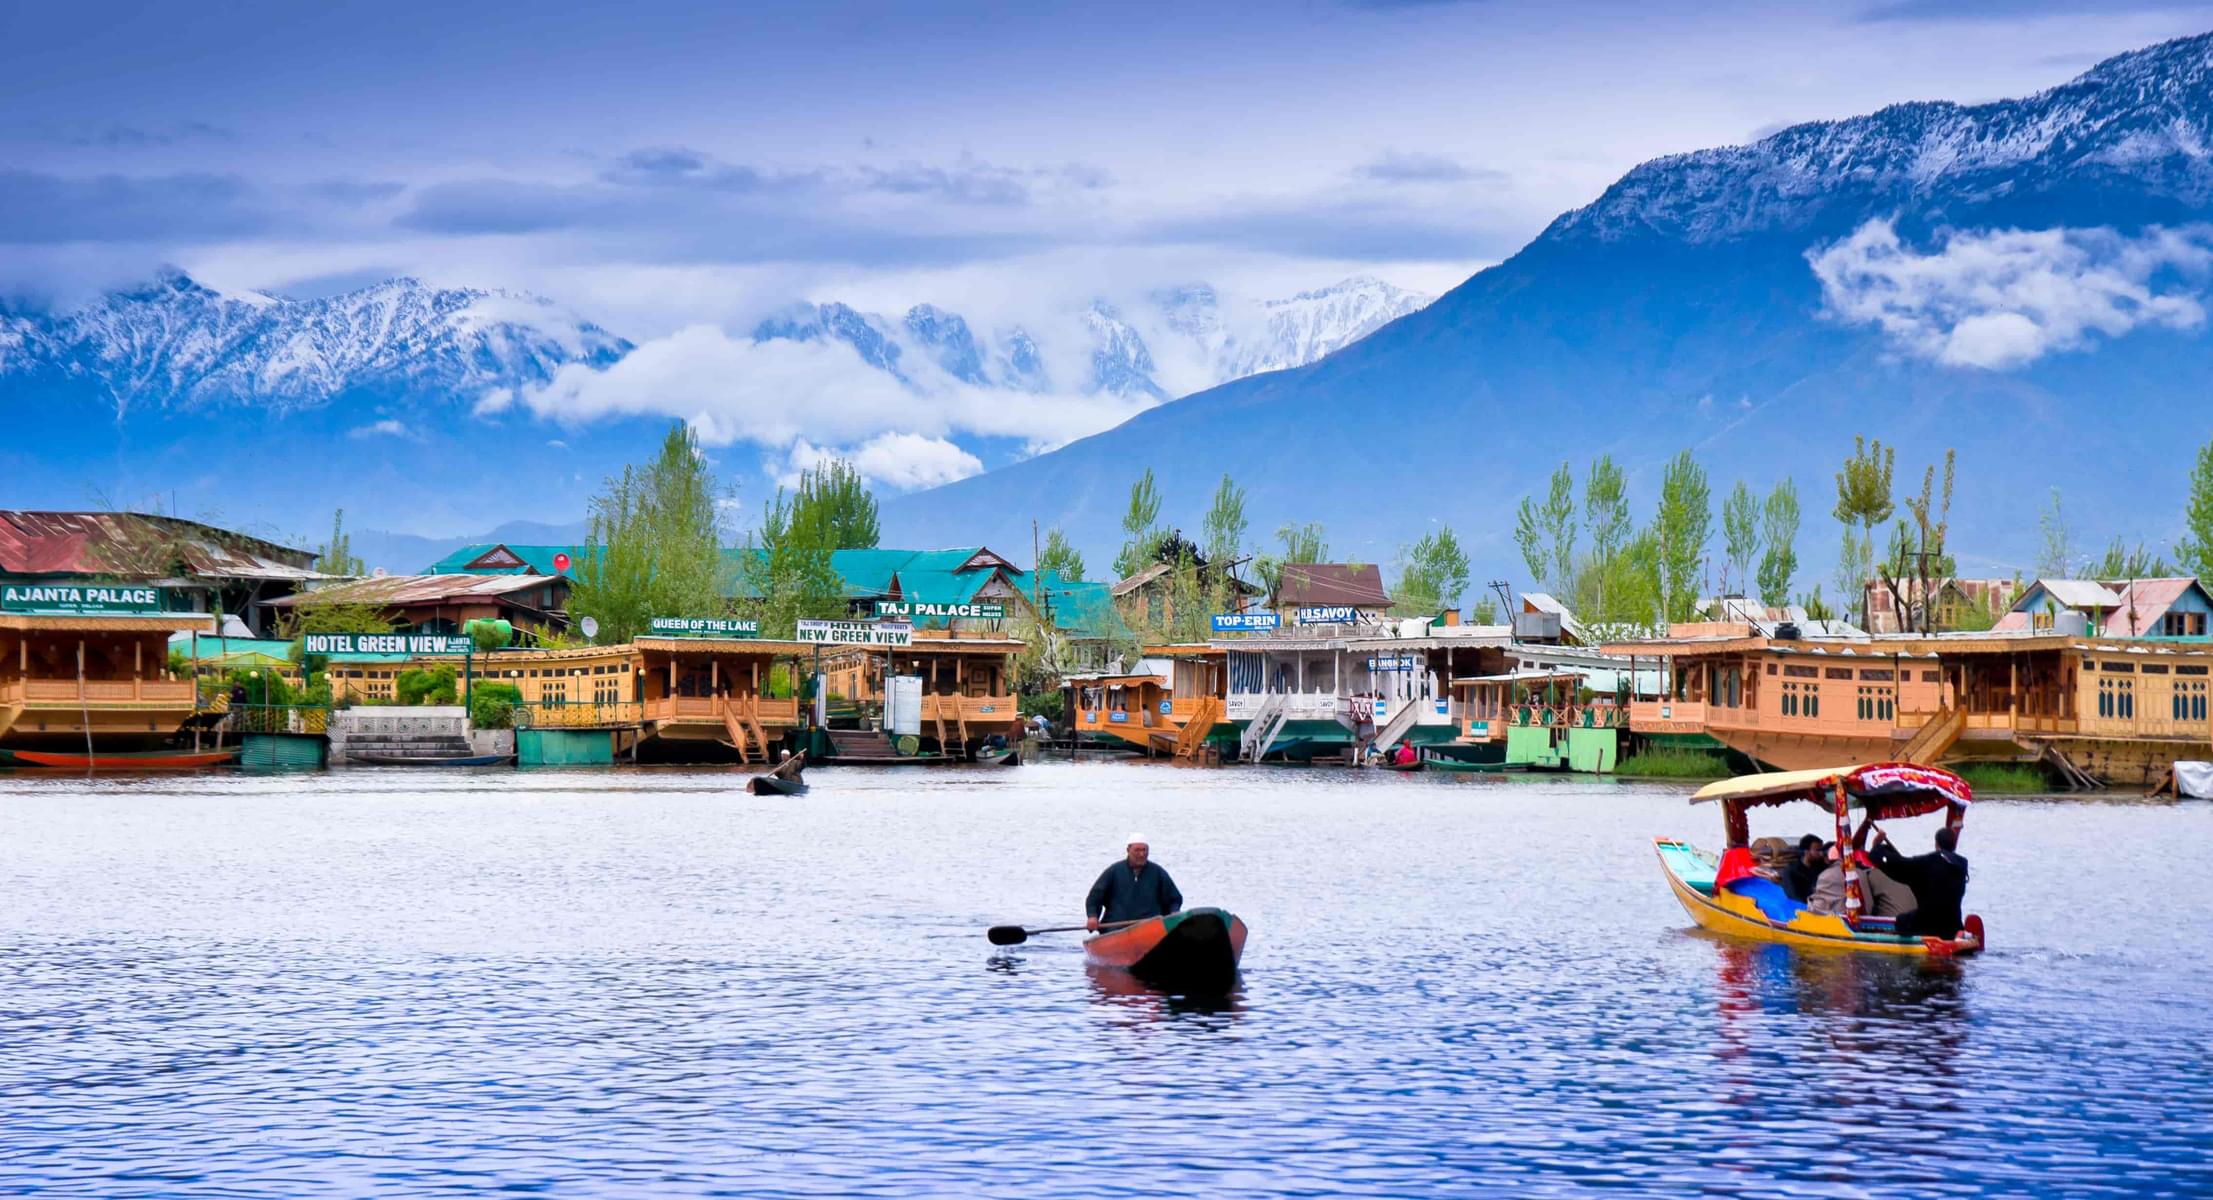 Take in the spectacular splendour of the surrounding Himalayan mountains from your shikhara boat ride